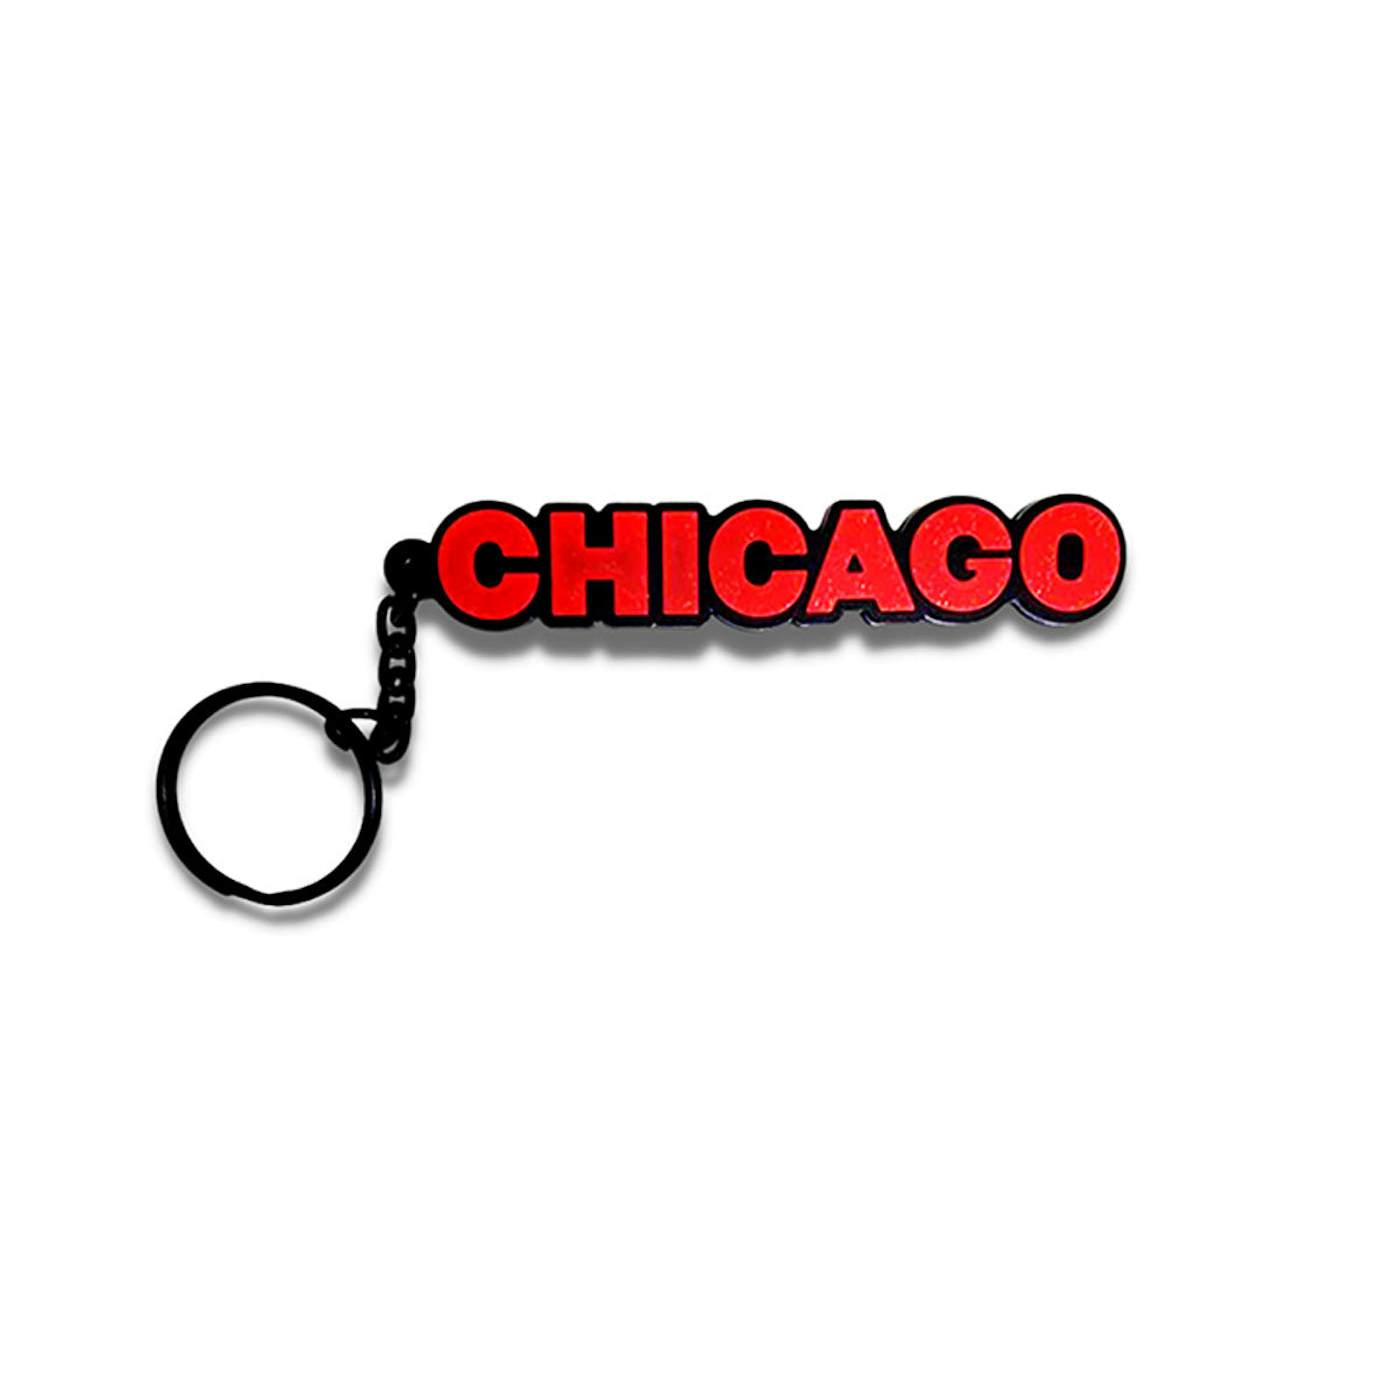 Chicago The Musical Chicago Rubber Keychain